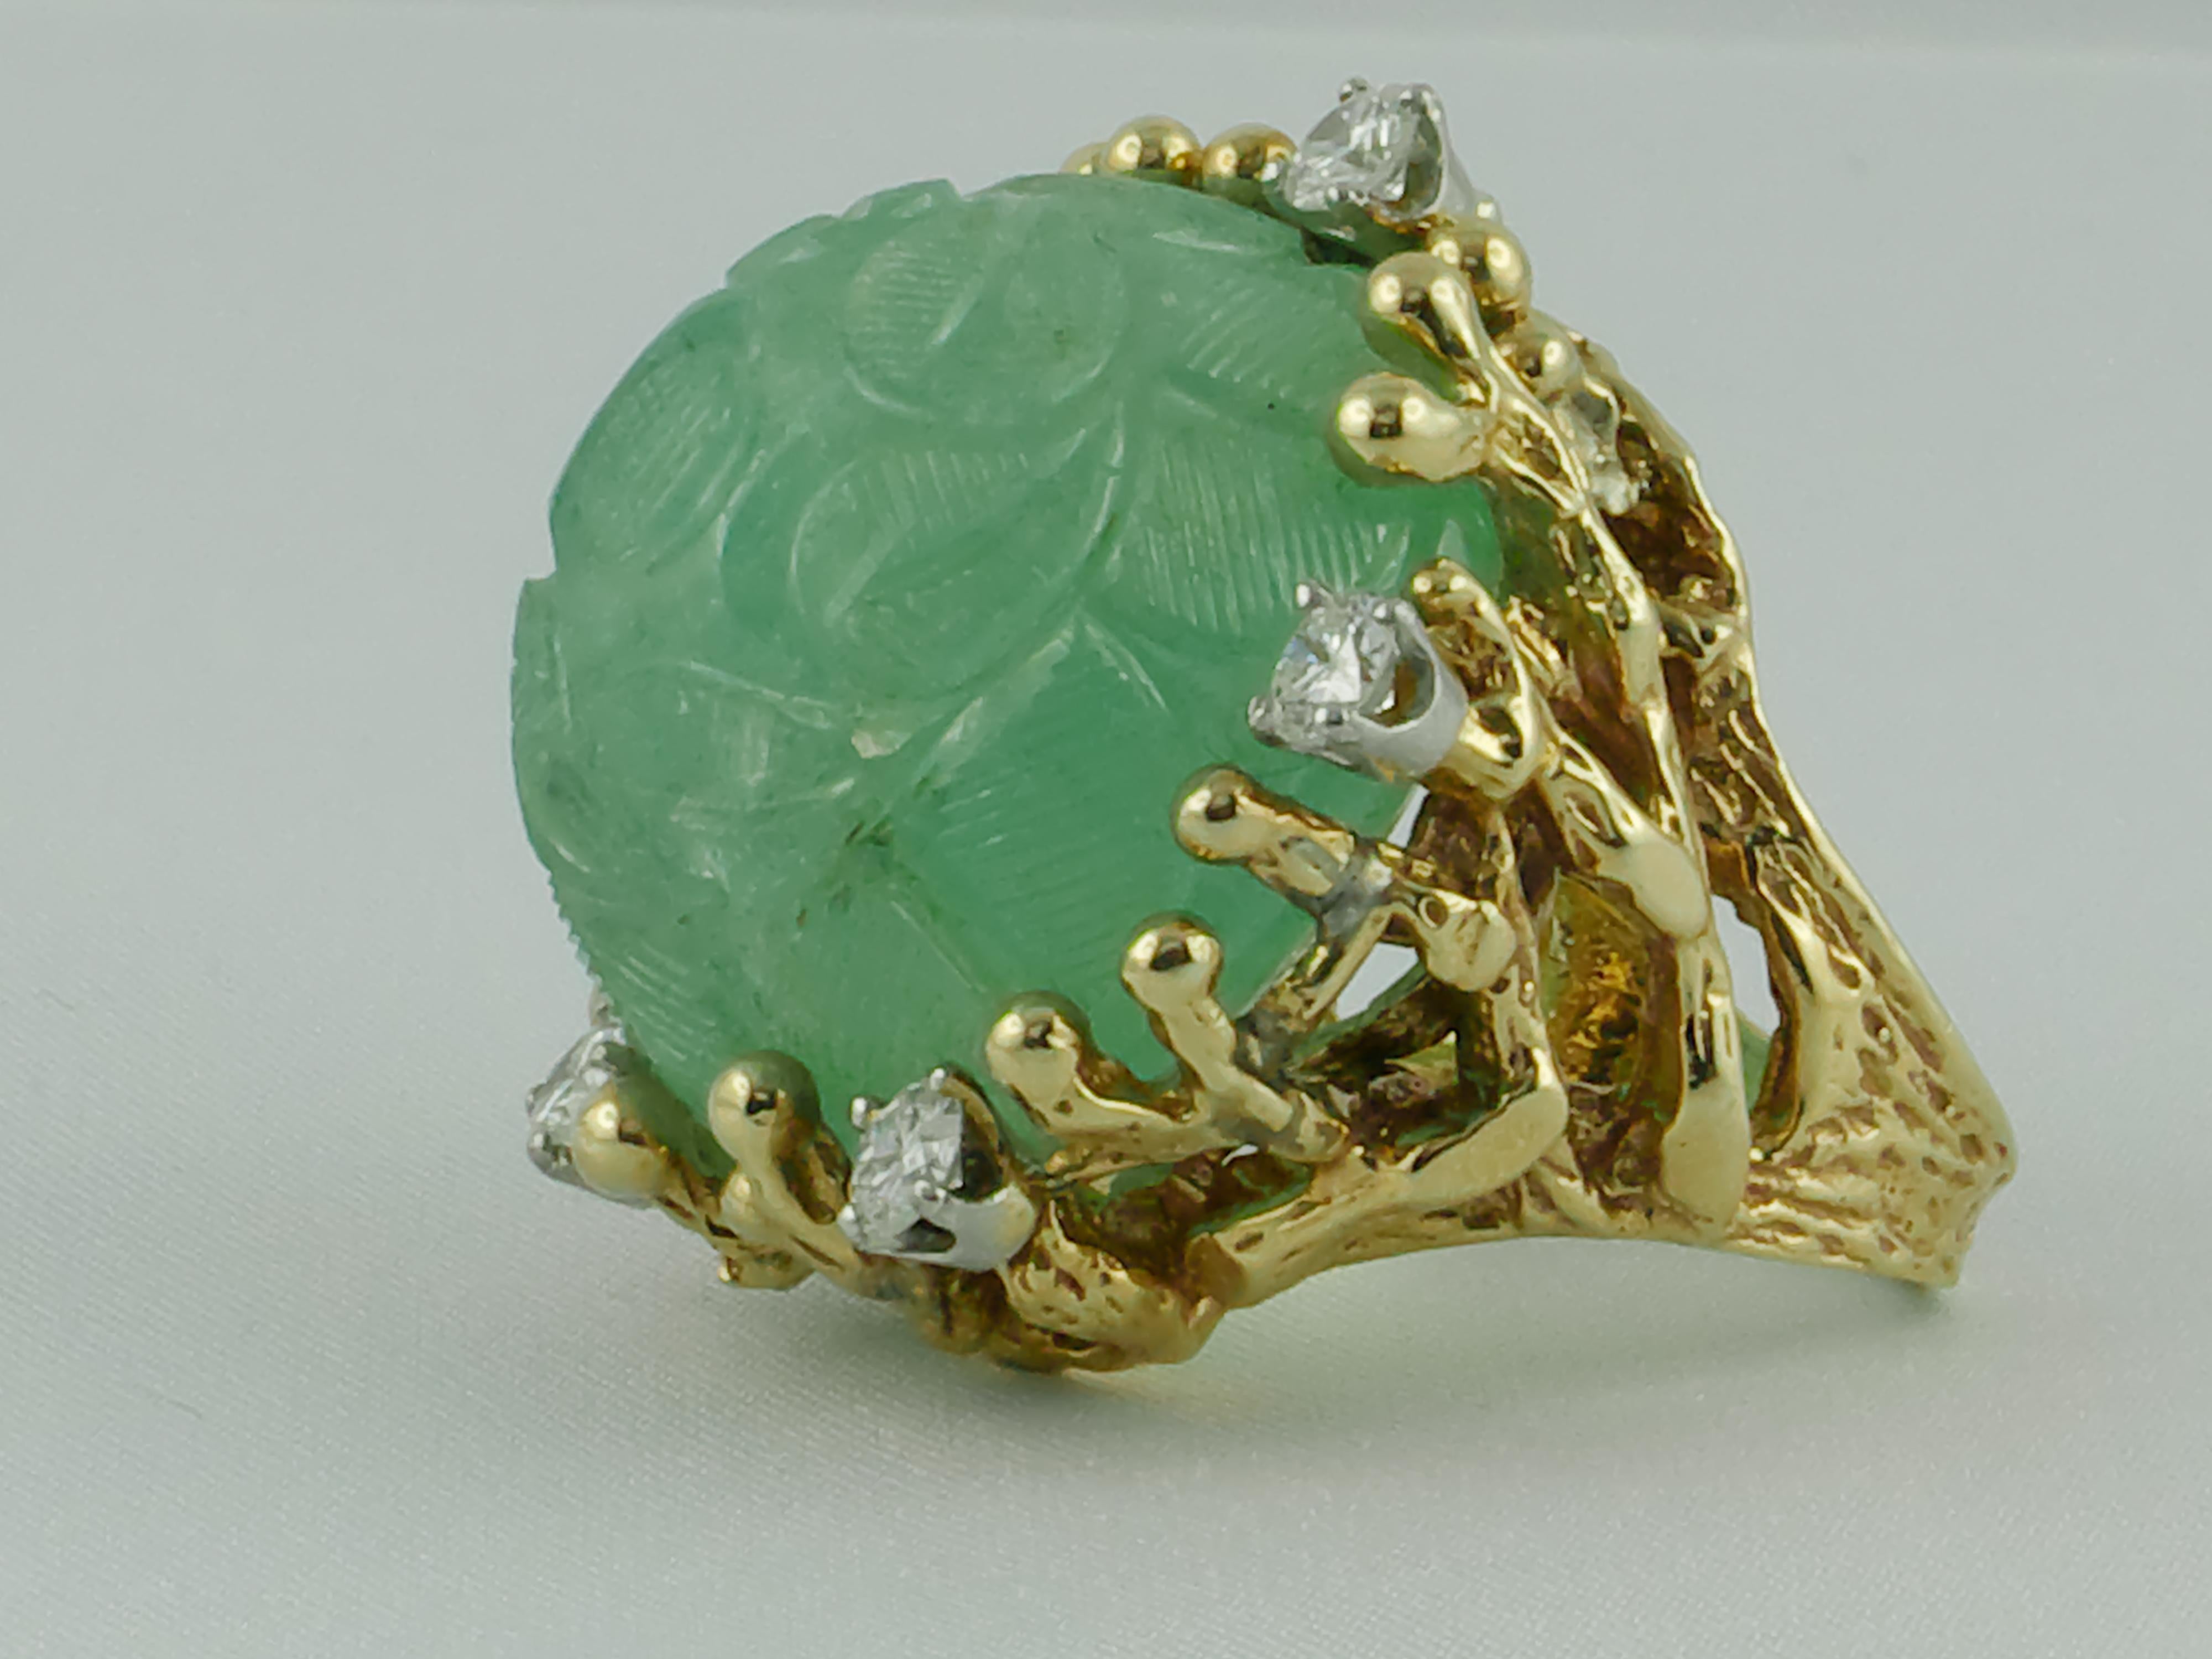 A stunning and imposing 1960s Cocktail Ring featuring a fabulous exquisitely carved 77.54 cts Emerald and 6 white round cut  Diamonds, approx 1.2cts,  set in an 18 karat Yellow Gold gnarled decor.
The shank is finely chiseled like a branch that